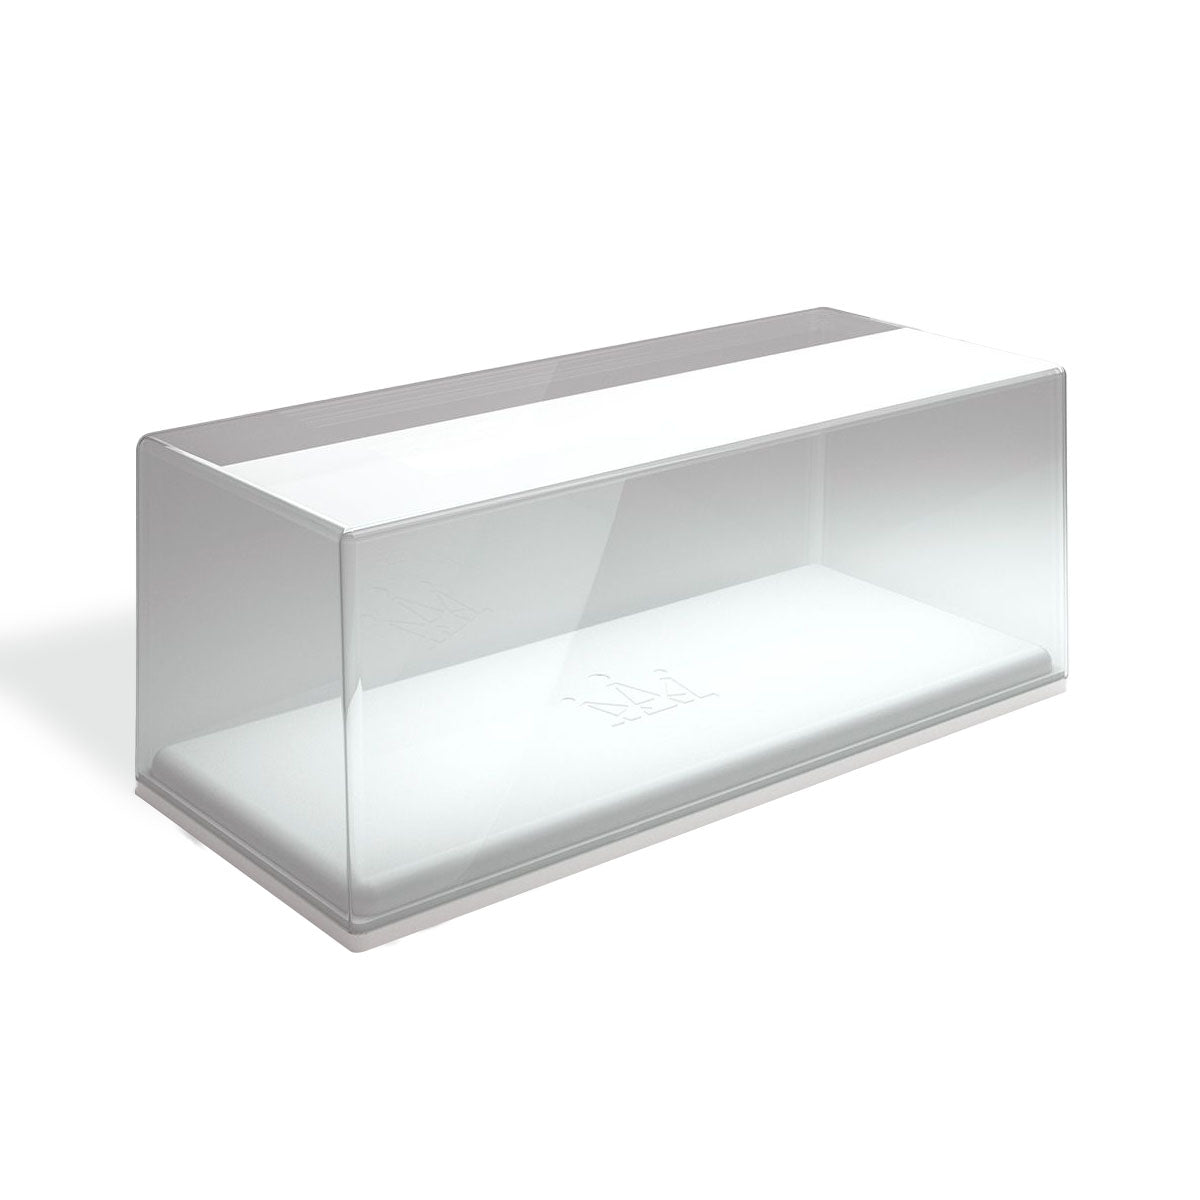 1:18 Scale Clear Display Case